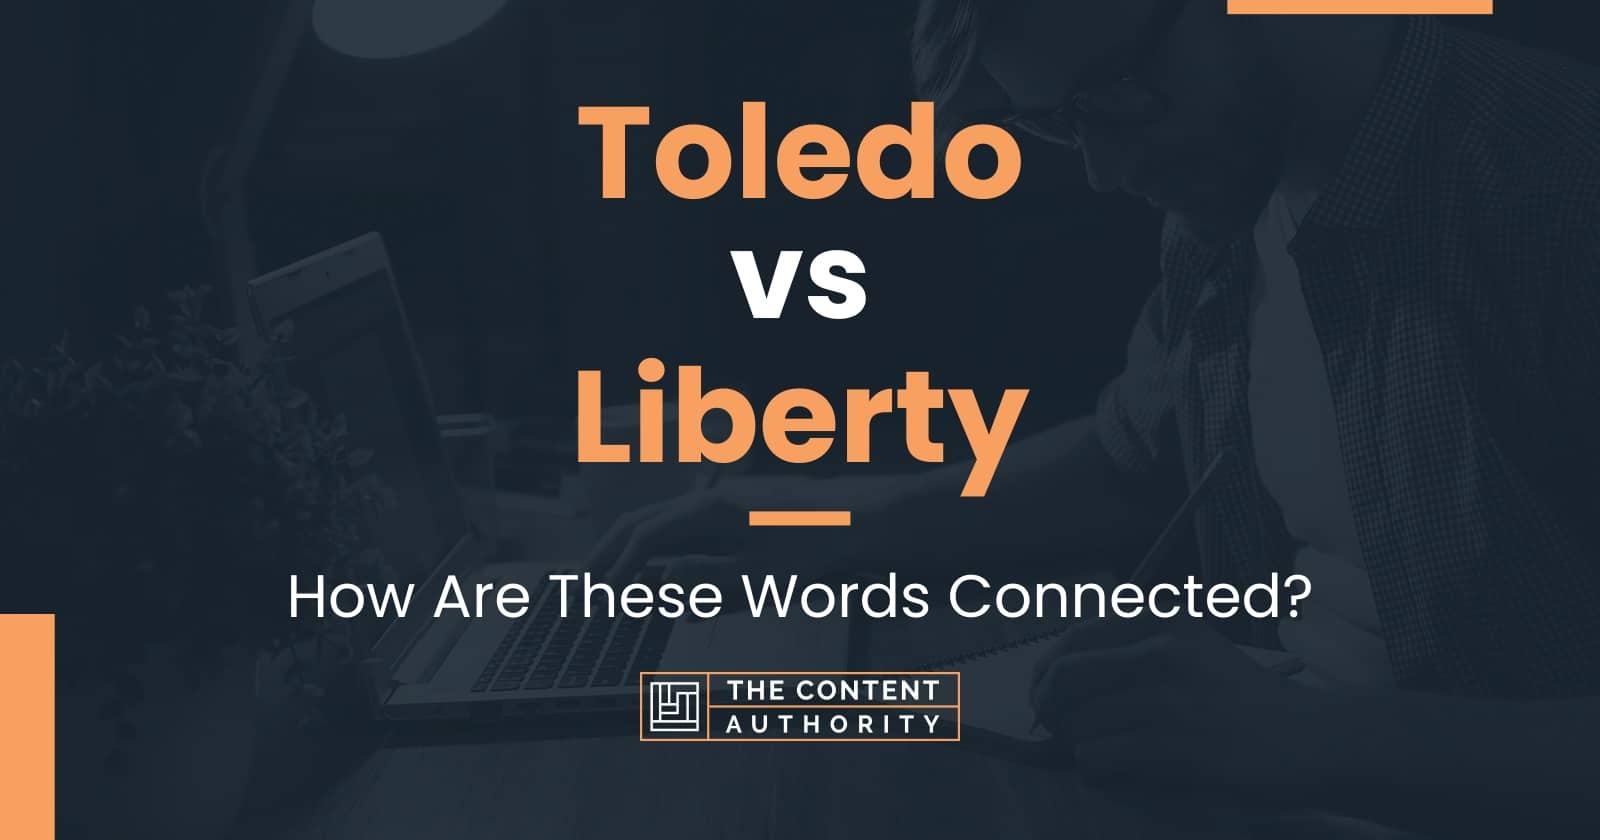 Toledo vs Liberty How Are These Words Connected?